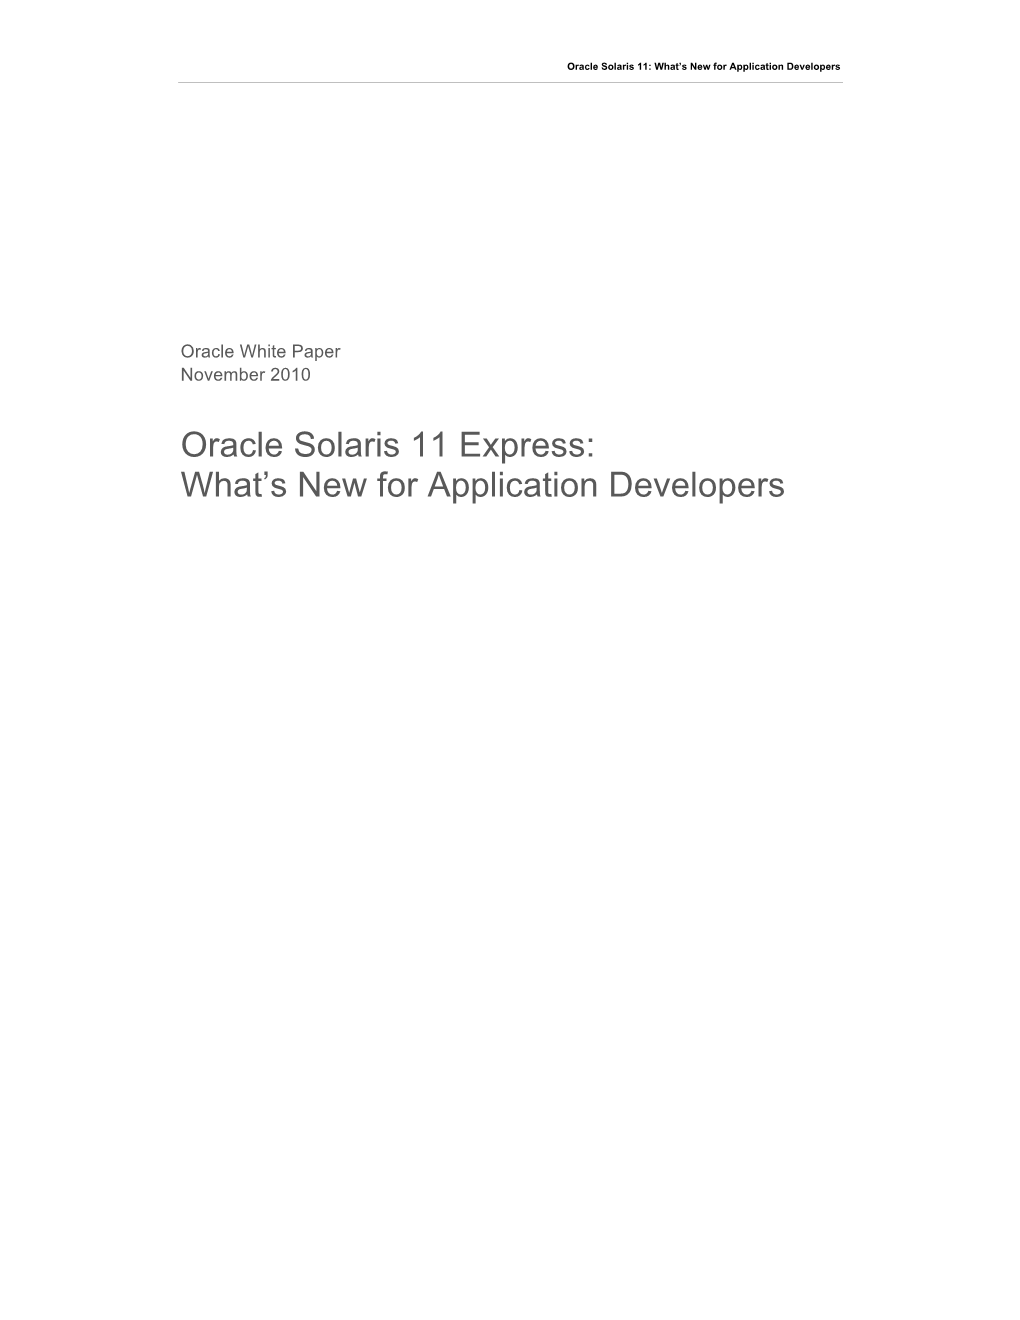 Oracle Solaris 11: What's New for Application Developers